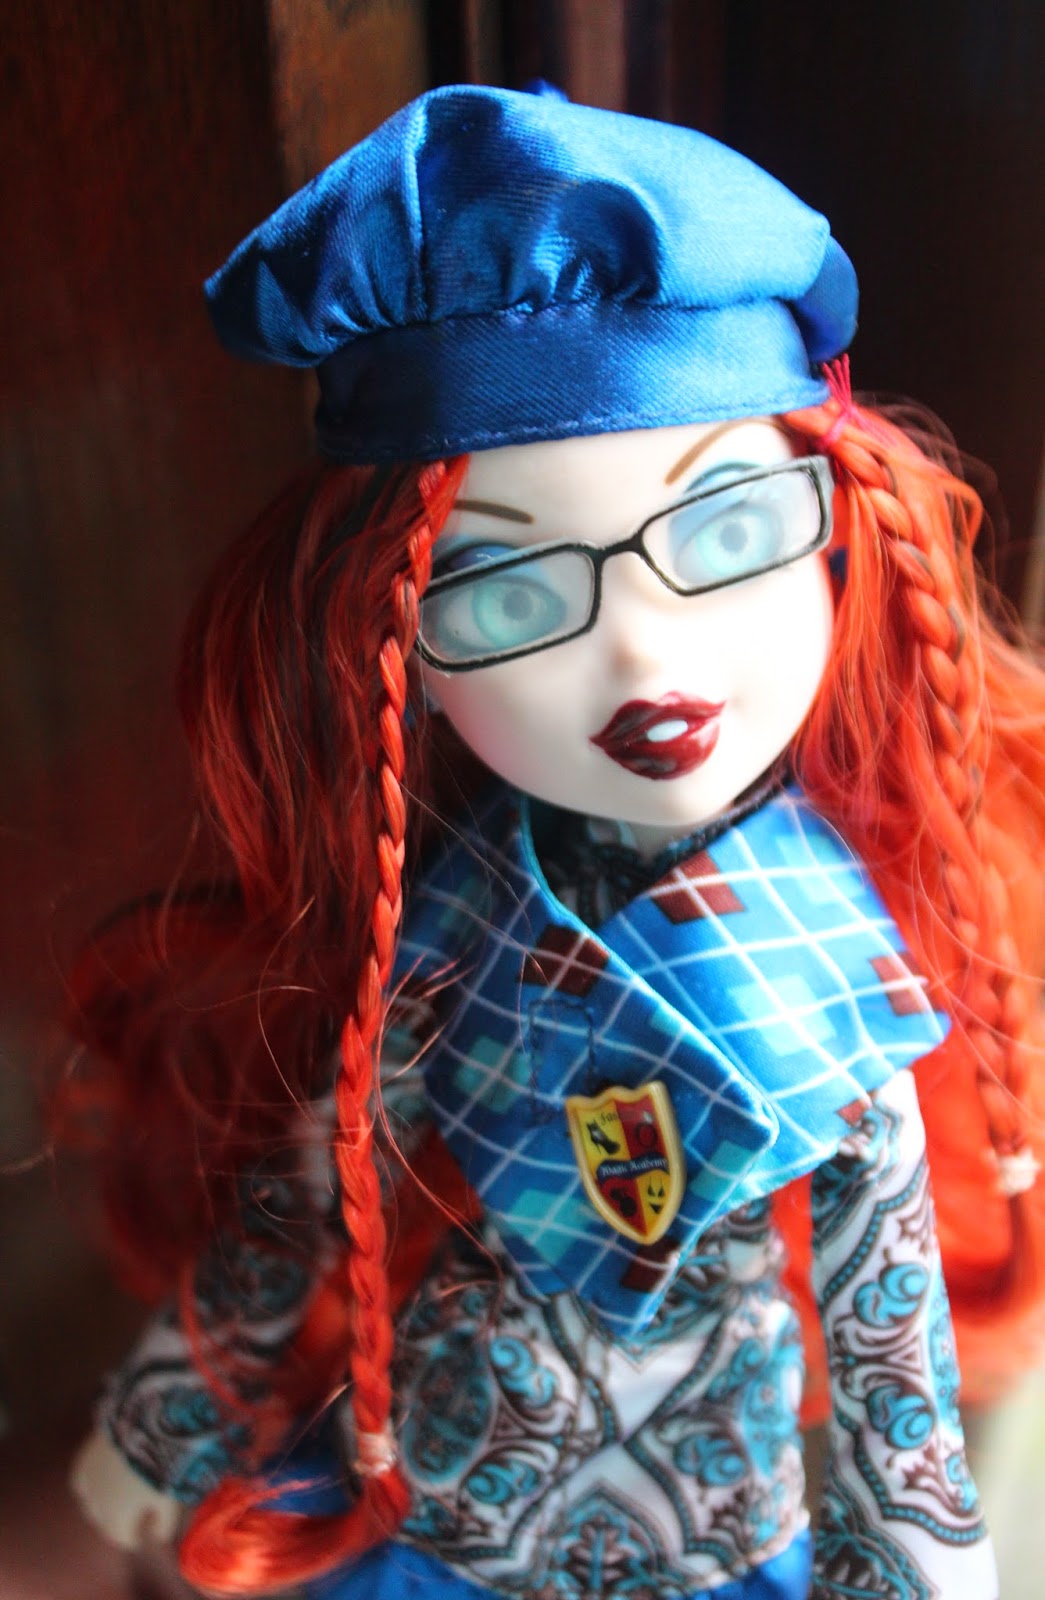 PLANET OF THE DOLLS: Doll-A-Day 276: Meygana Broomstix